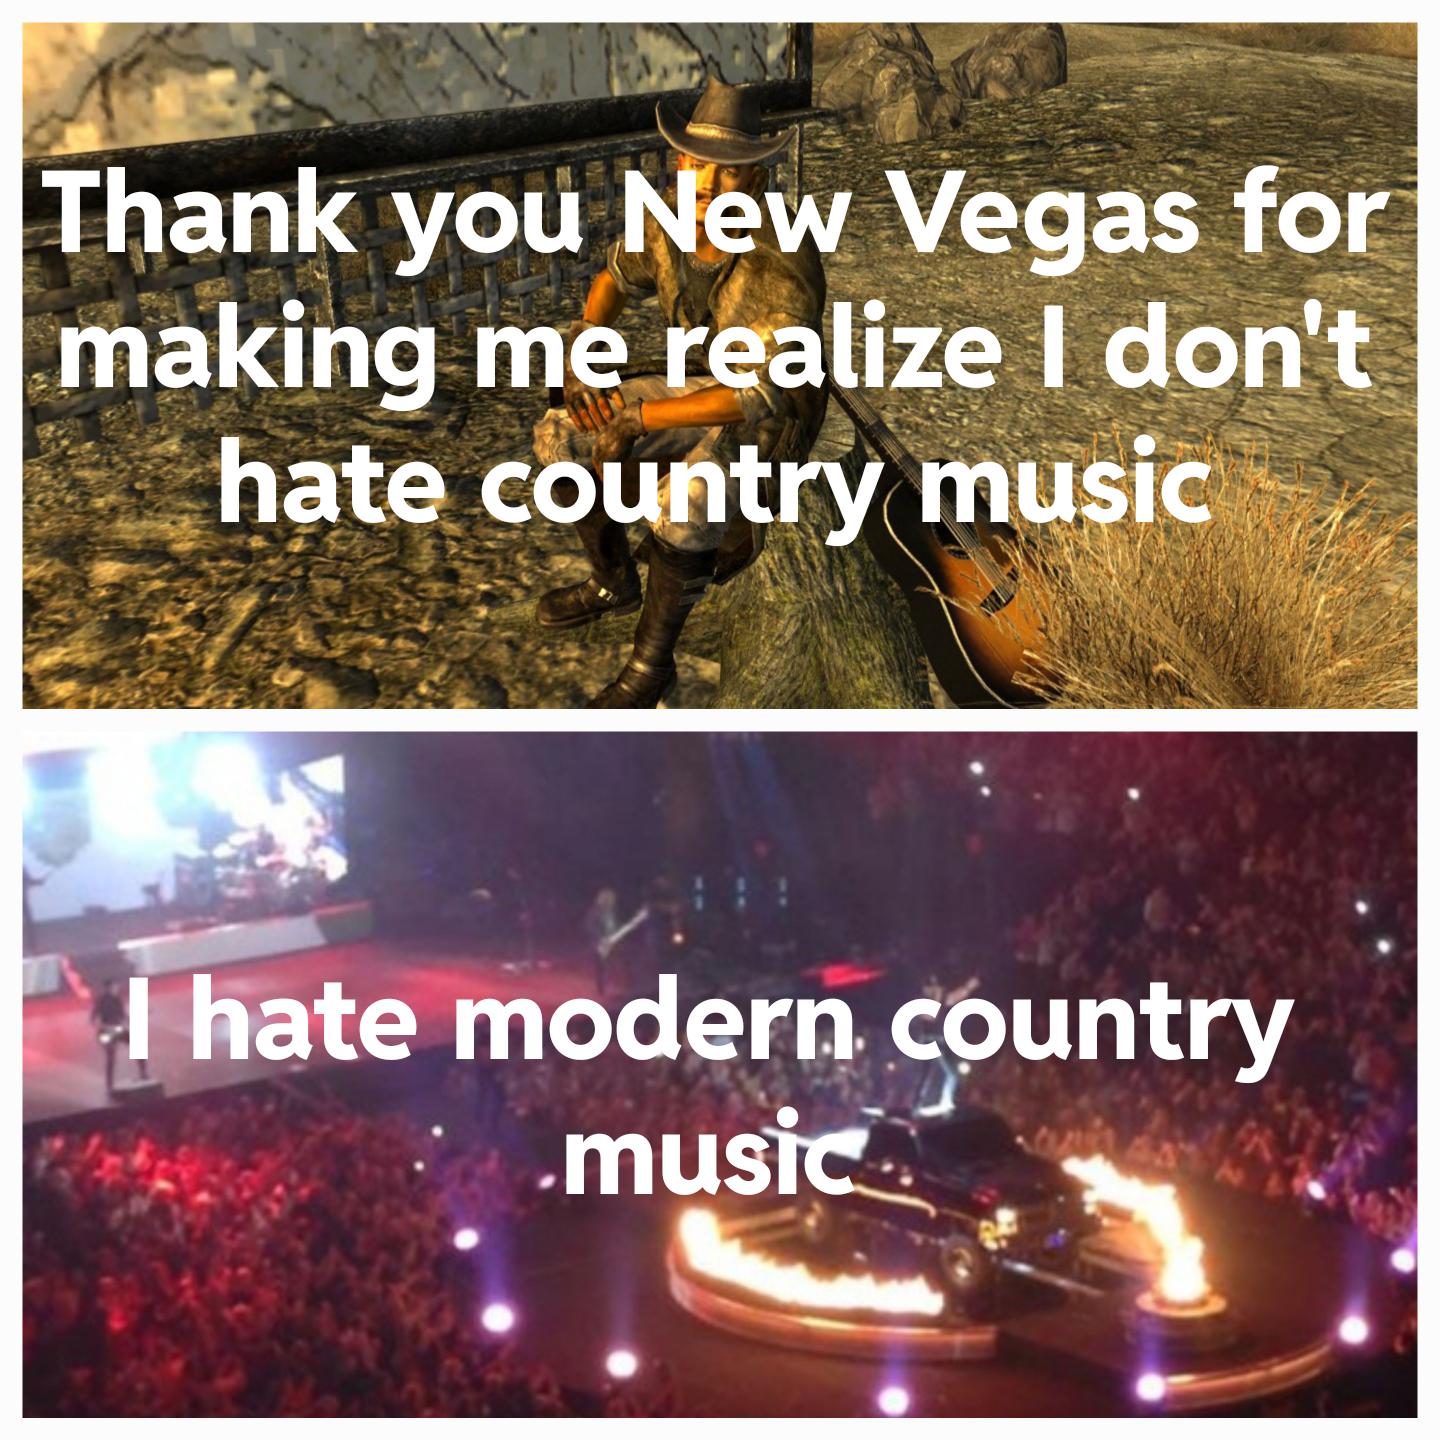 dank memes - heat - Thank you New Vegas for making me realize I don't hate country music I hate modern country music